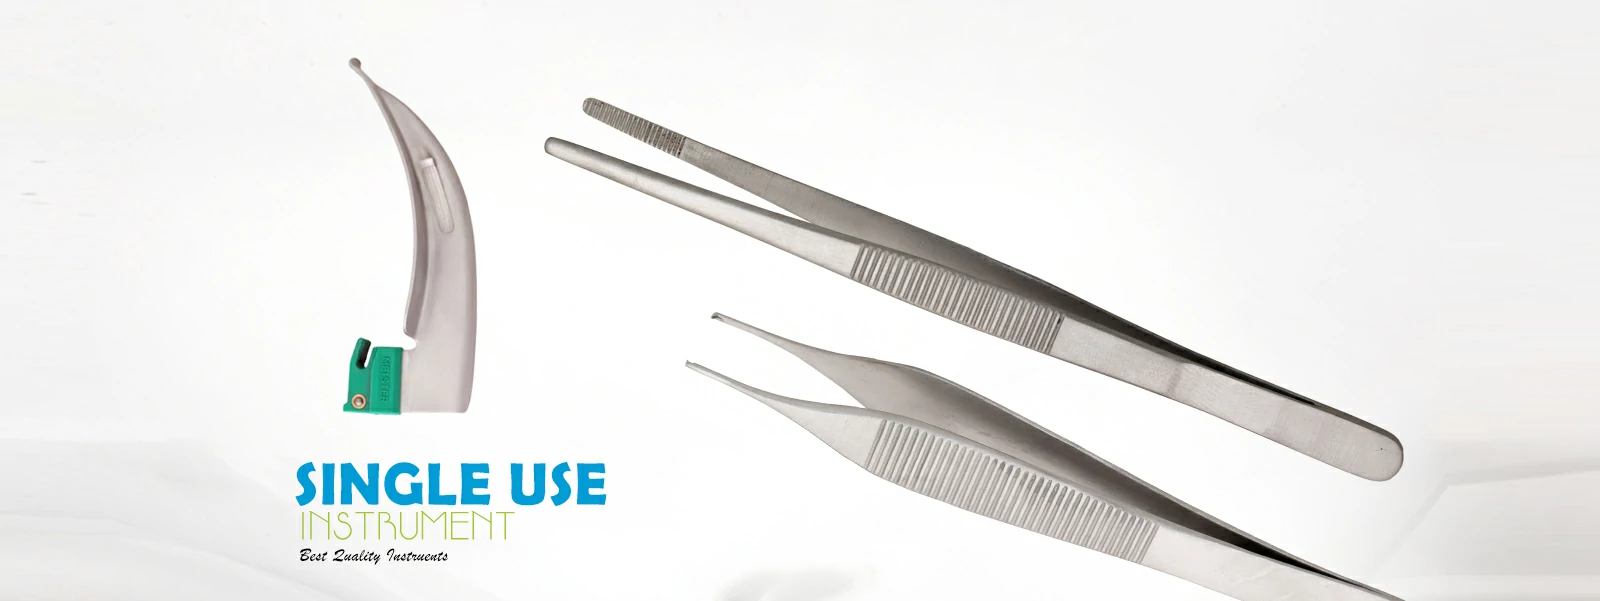 Surgical Instruments and Dental Instruments Supplier